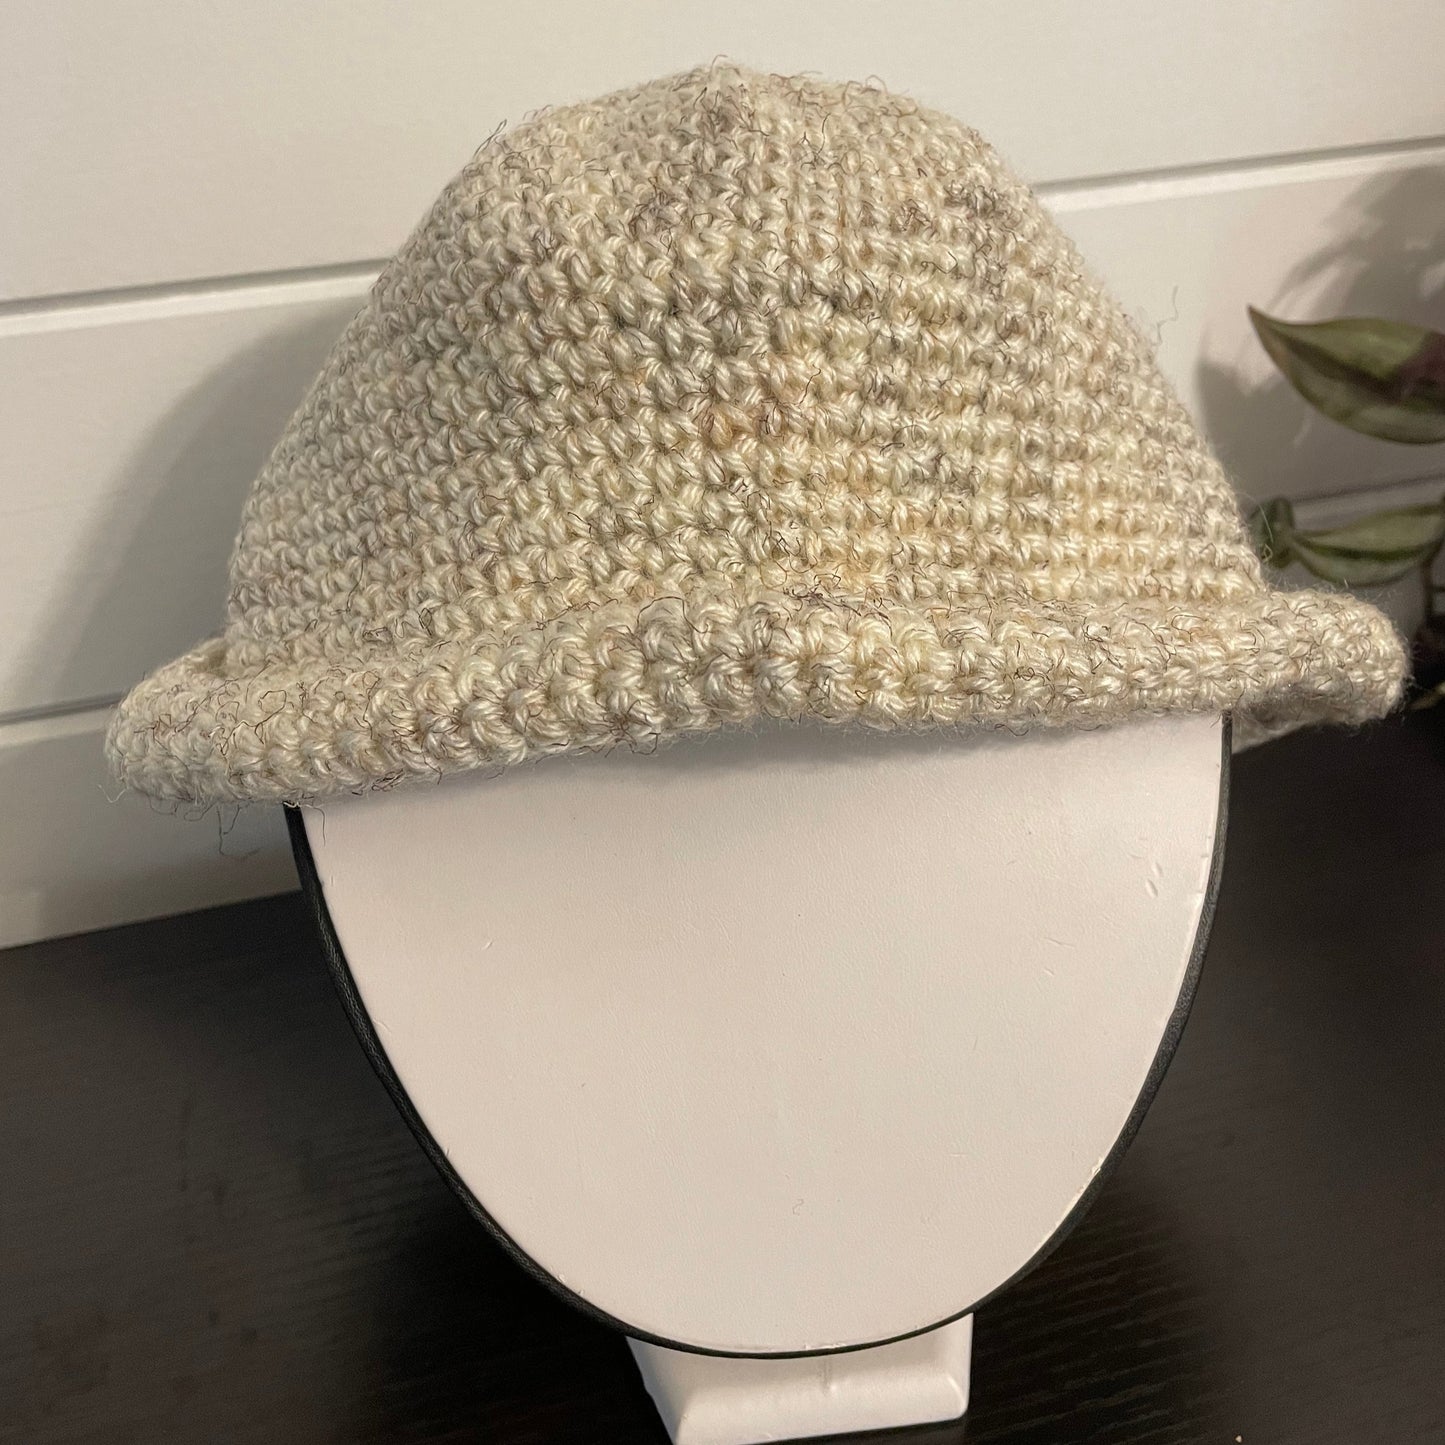 Crochet Rolled Brim Hat in Light Marbled Wheat Hand Crafted Knit Unisex Vintage Retro Style Outdoor Front View on black and white background